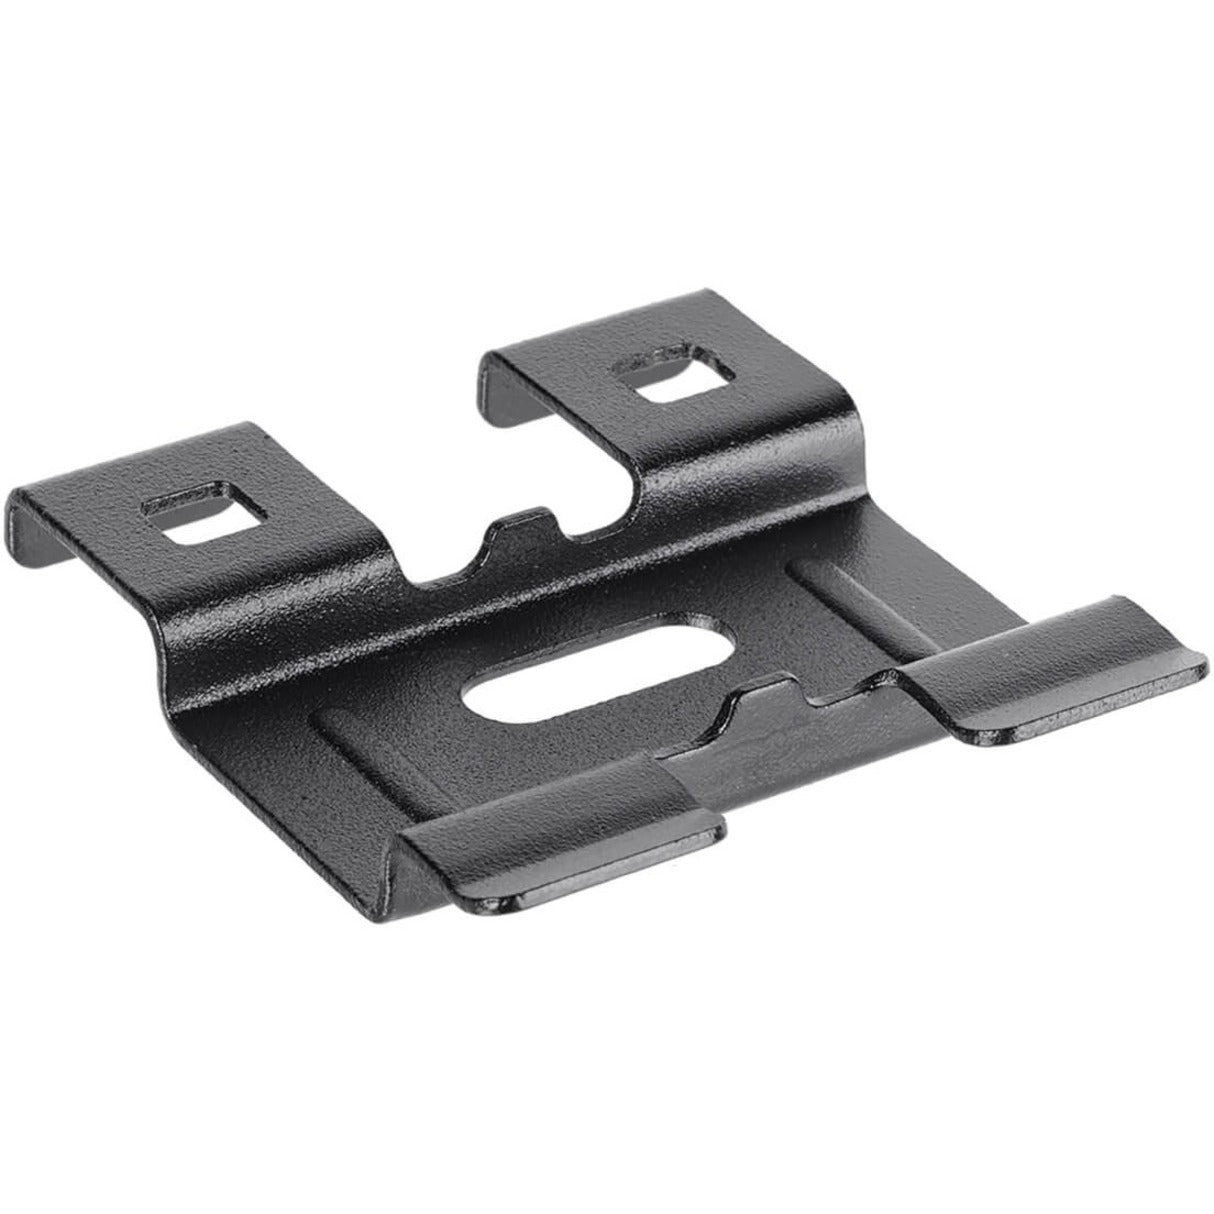 Tripp Lite SRWBTLCPLRBS Toolless Coupler Base for Wire Mesh Cable Trays, Mounting Kit